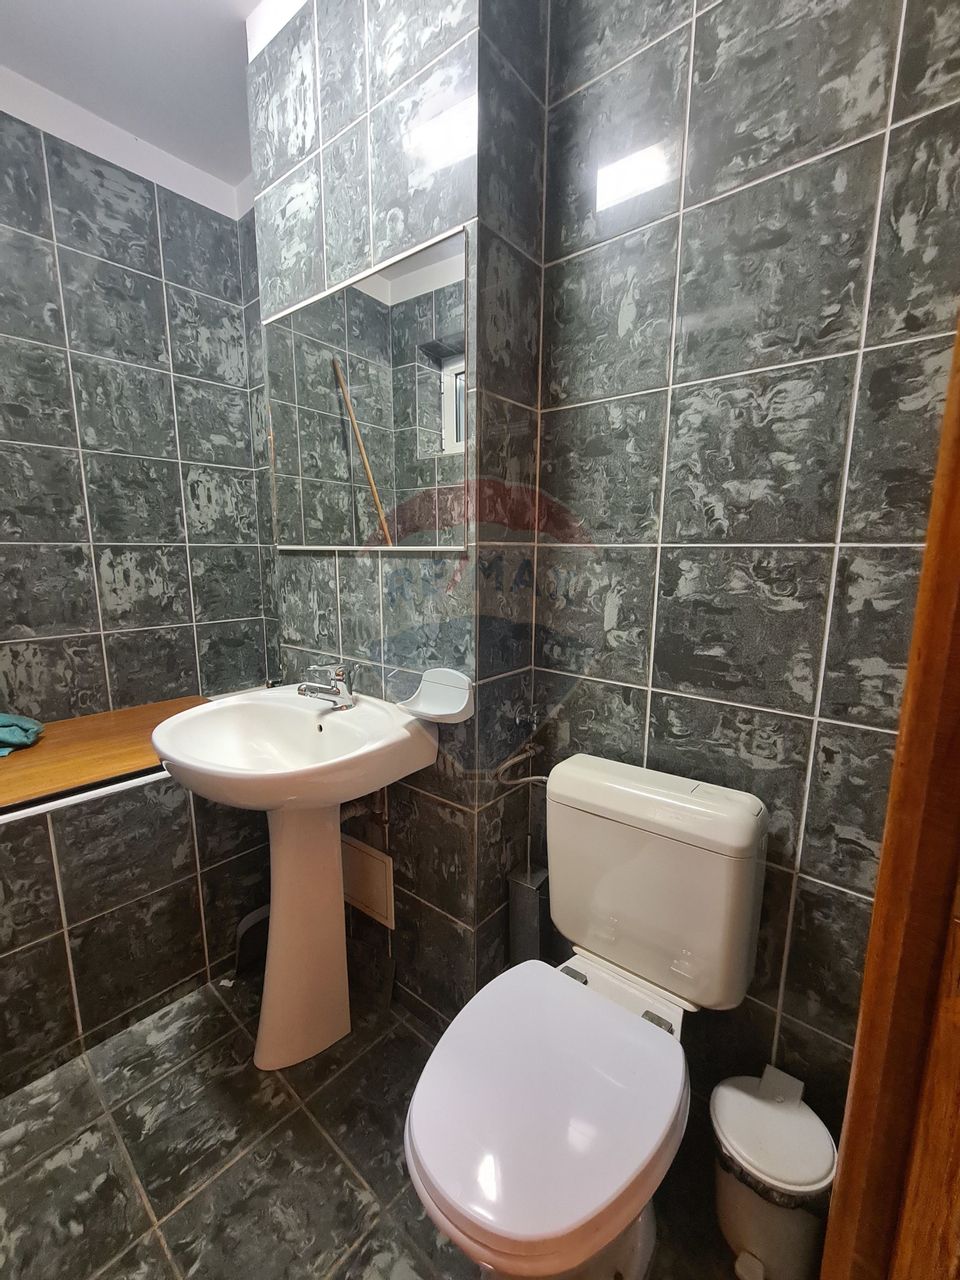 3 room Apartment for rent, Tineretului area